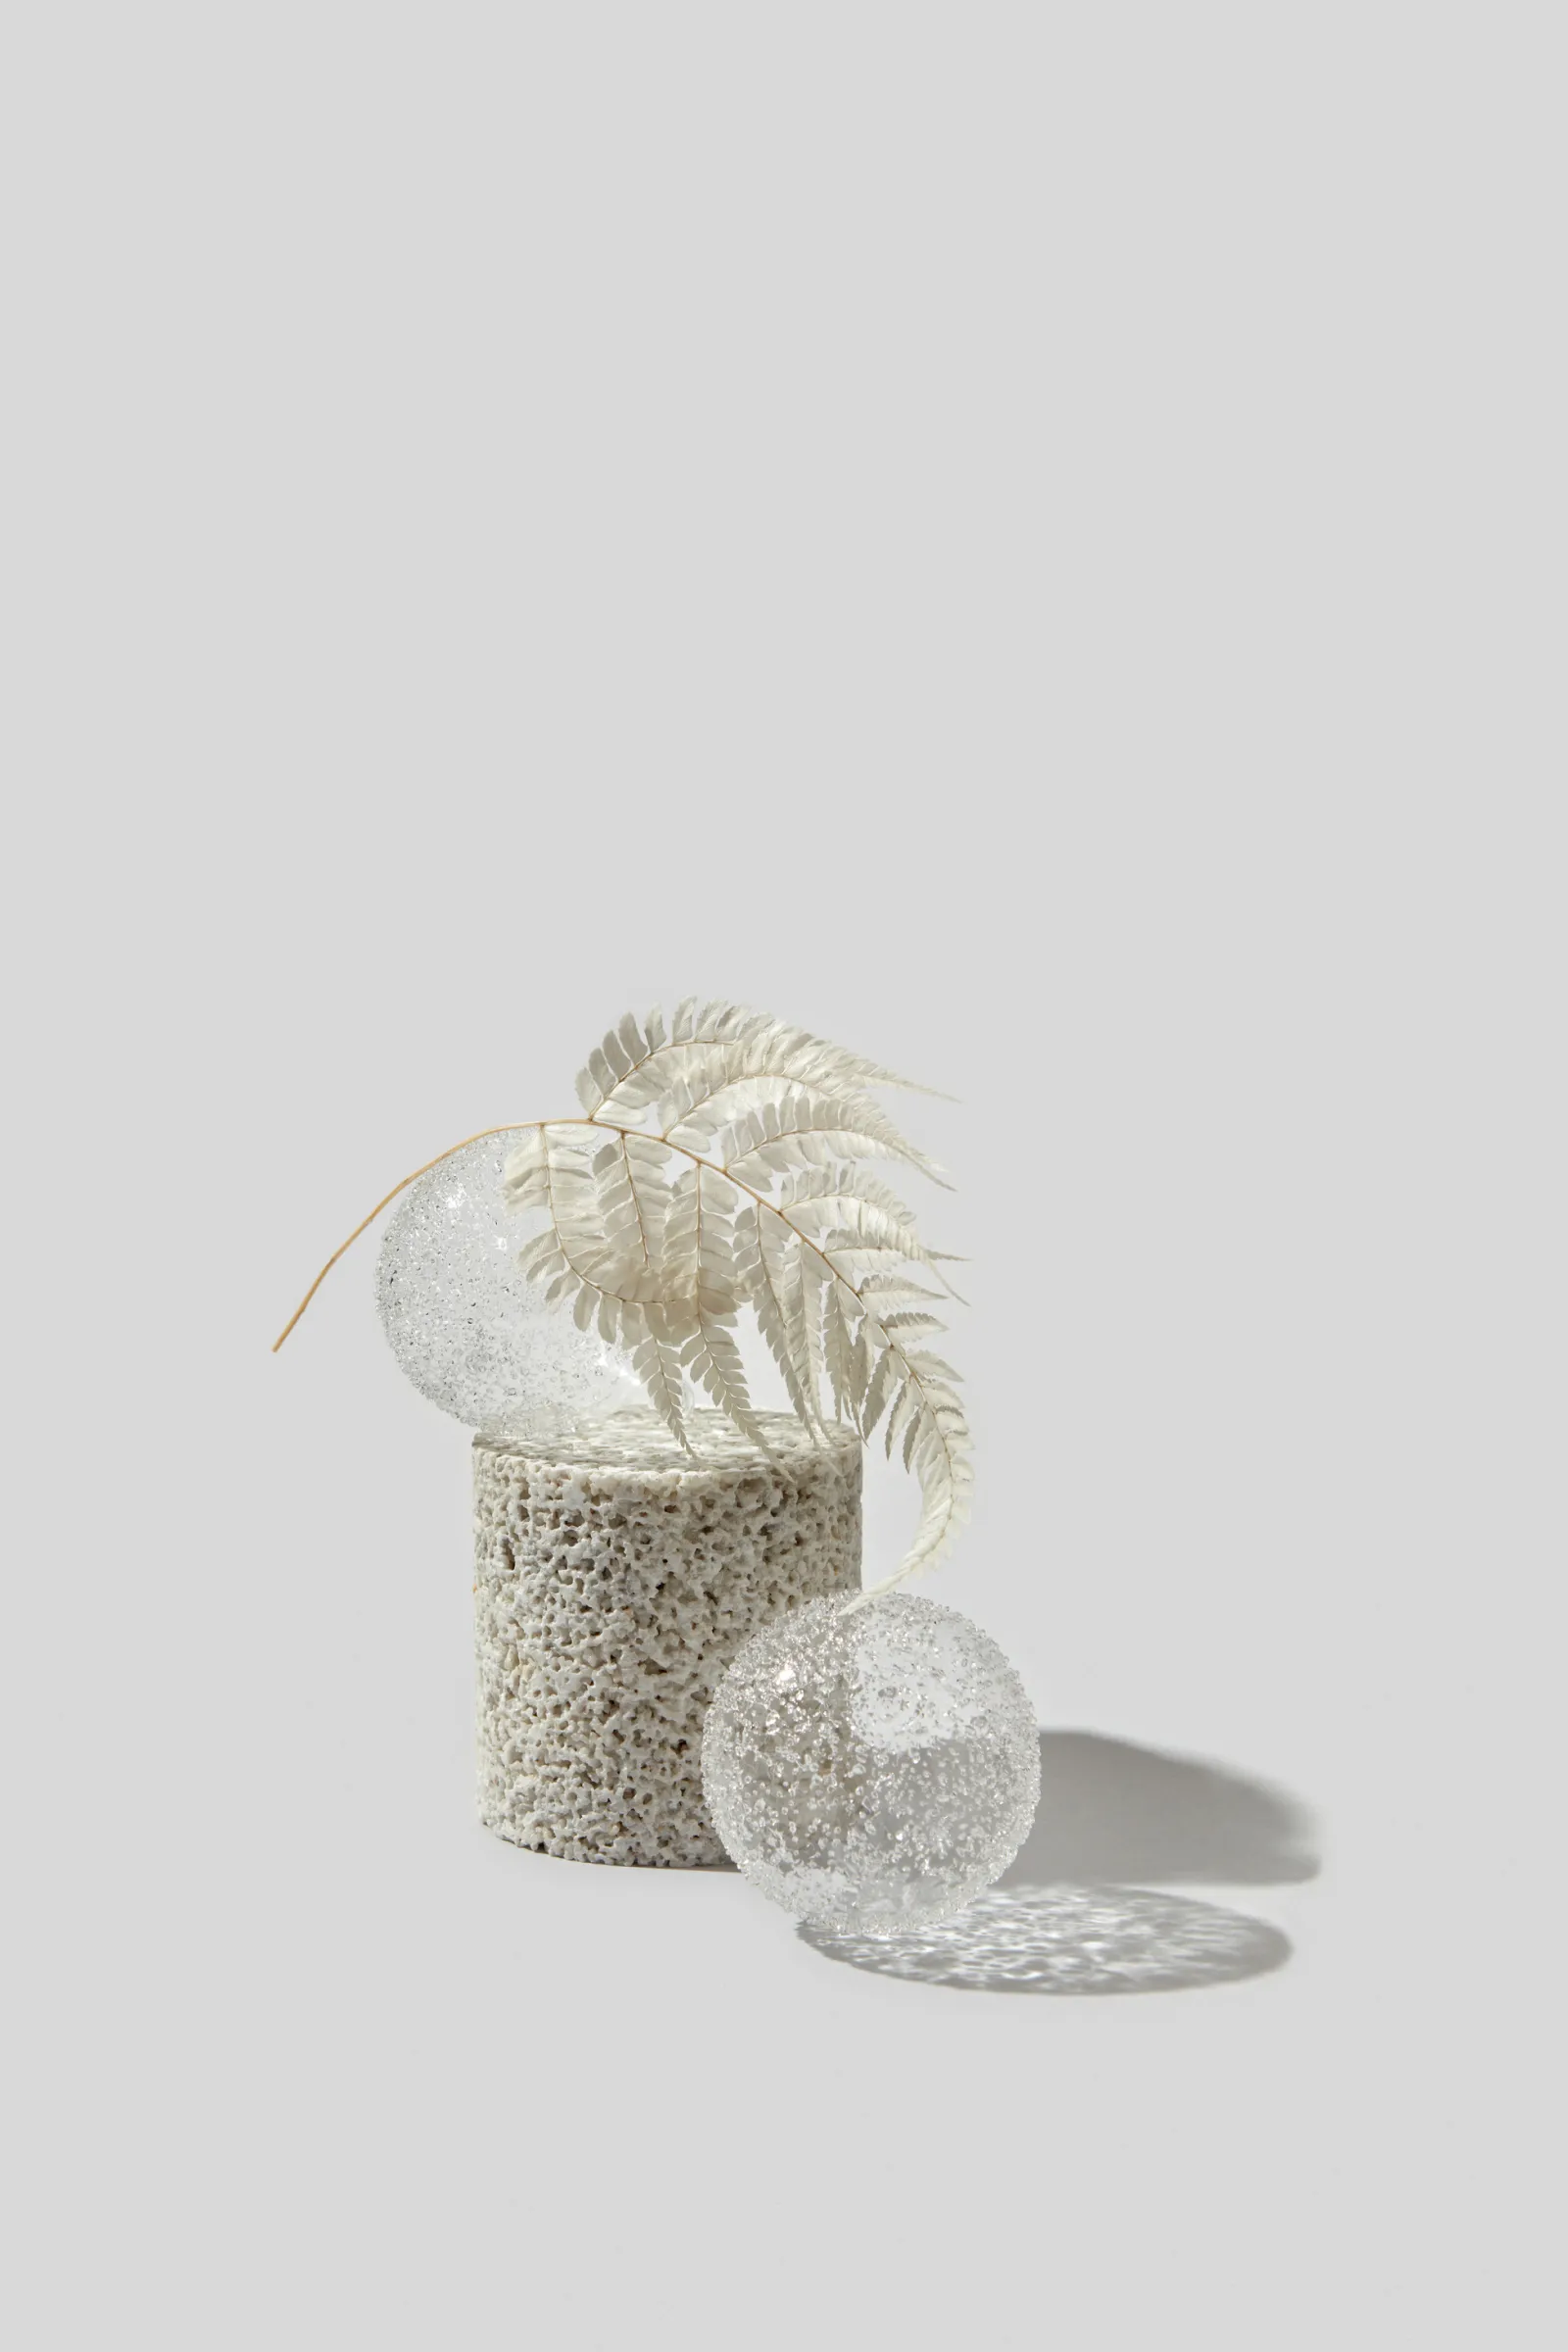 Two clear glass spheres on a coral-like textured base with a white fern leaf, on a light background.